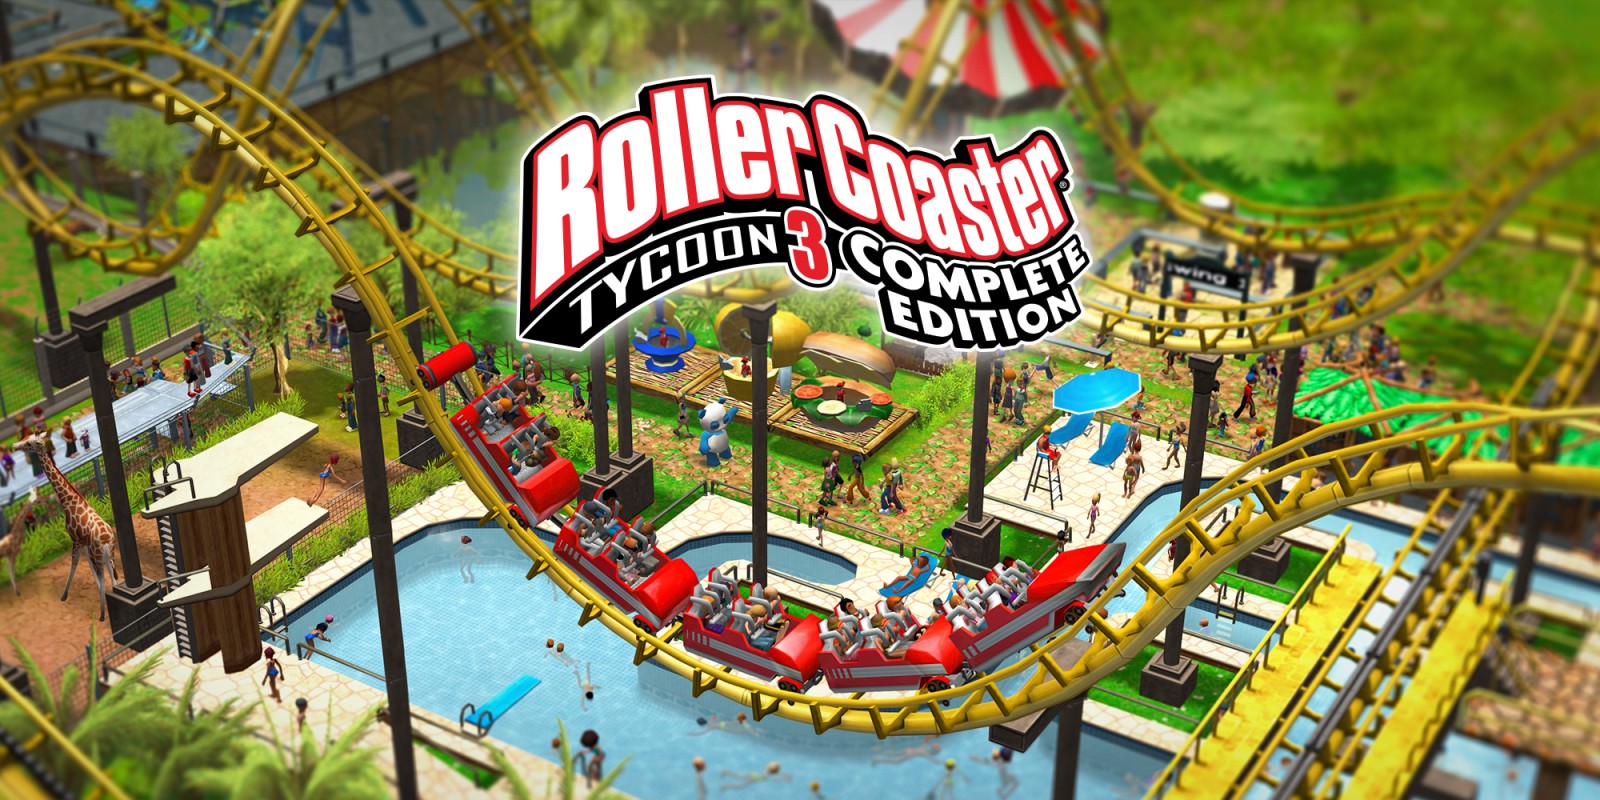 Roller Coaster Tycoon 3 - Recensione